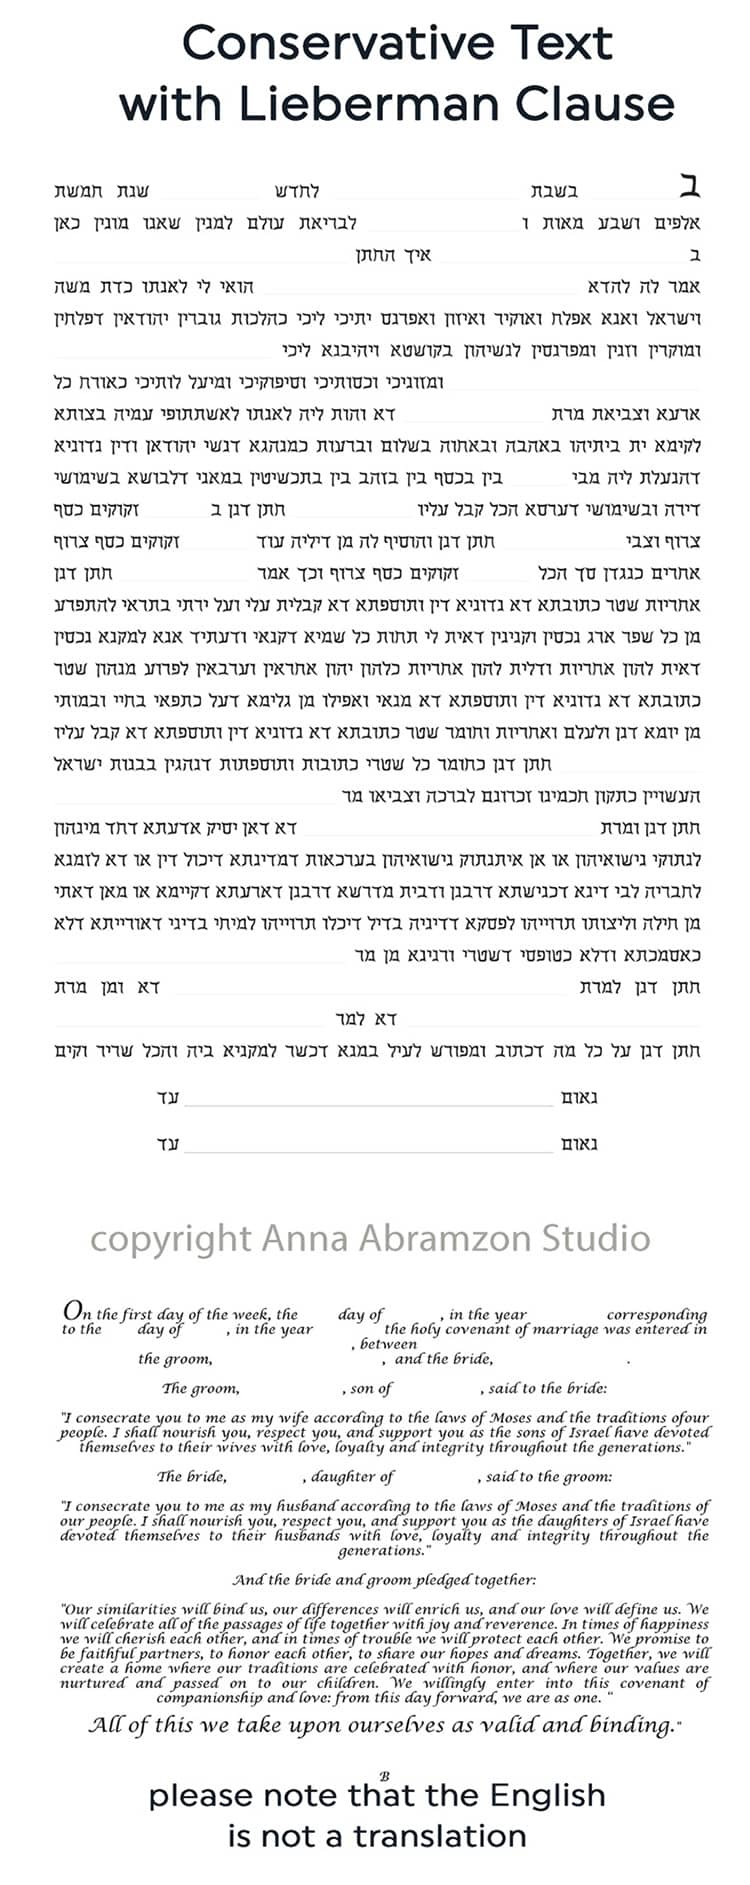 Conservative Ketubah Text in Aramaic and English